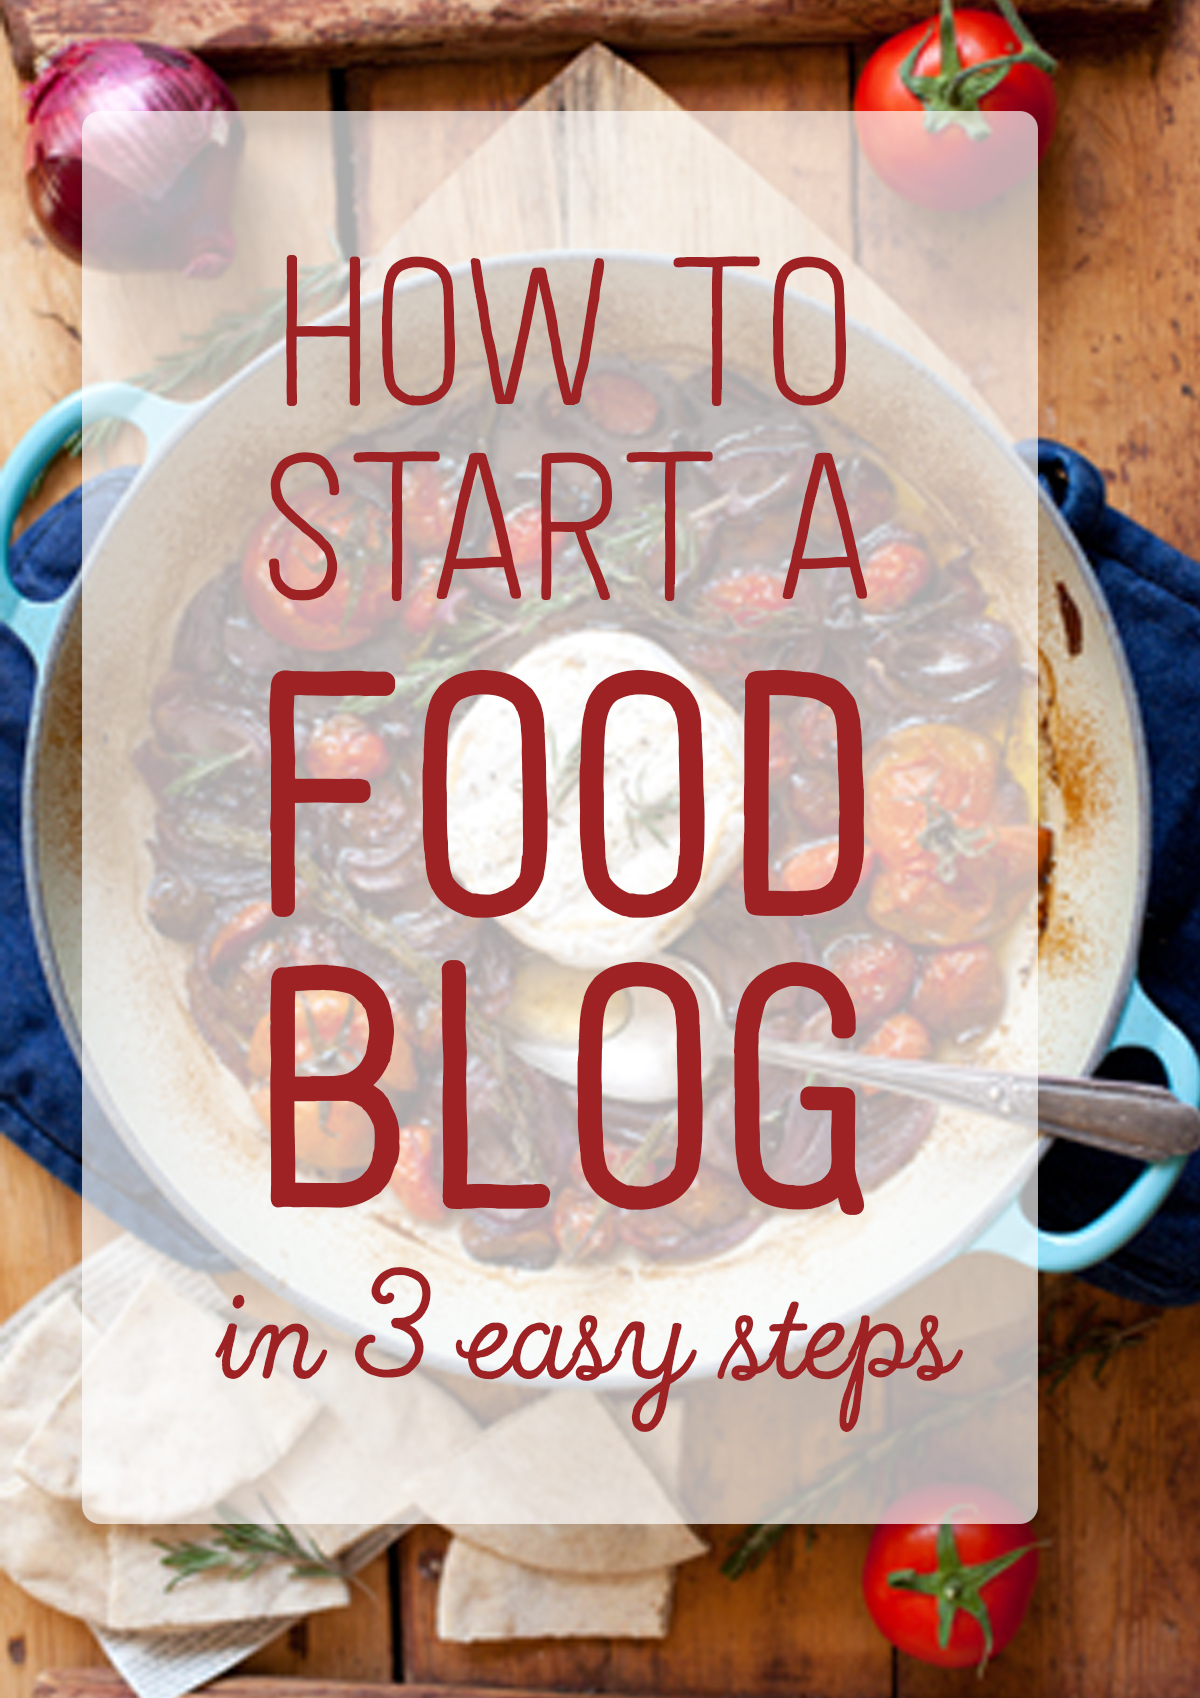 How to Start a Food Blog in 3 Easy Steps - Follow this easy to follow tutorial